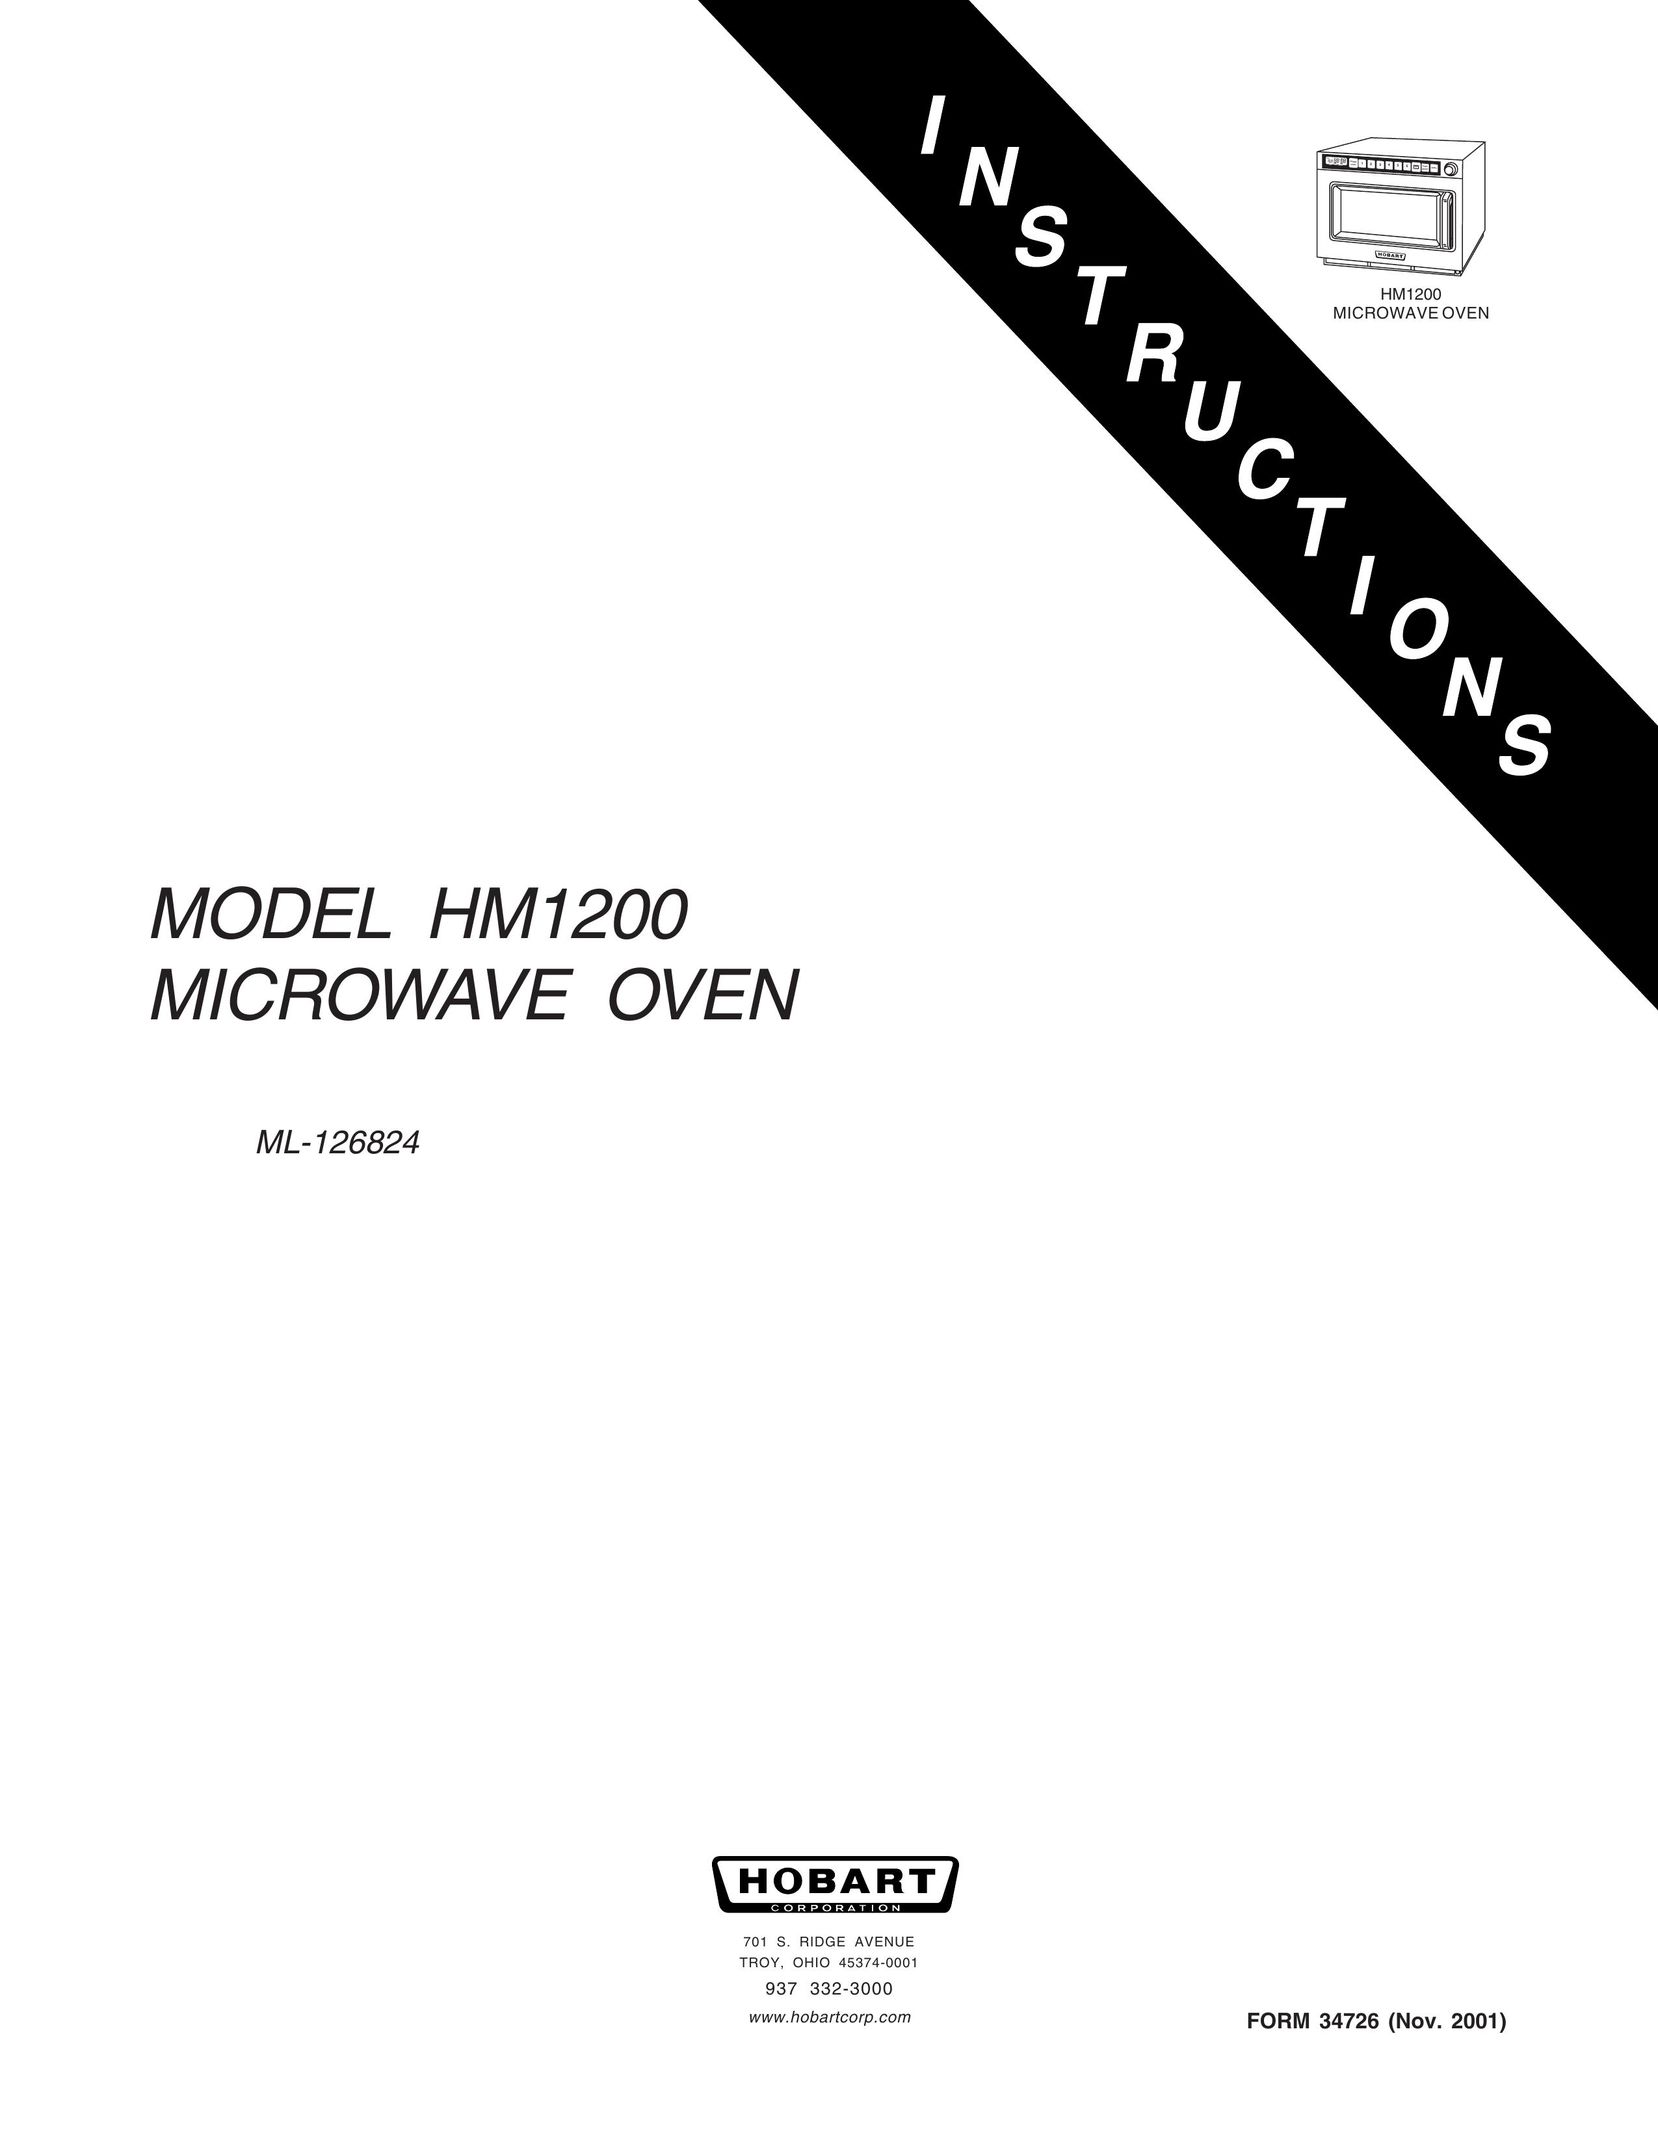 Hobart HM1200 Microwave Oven User Manual